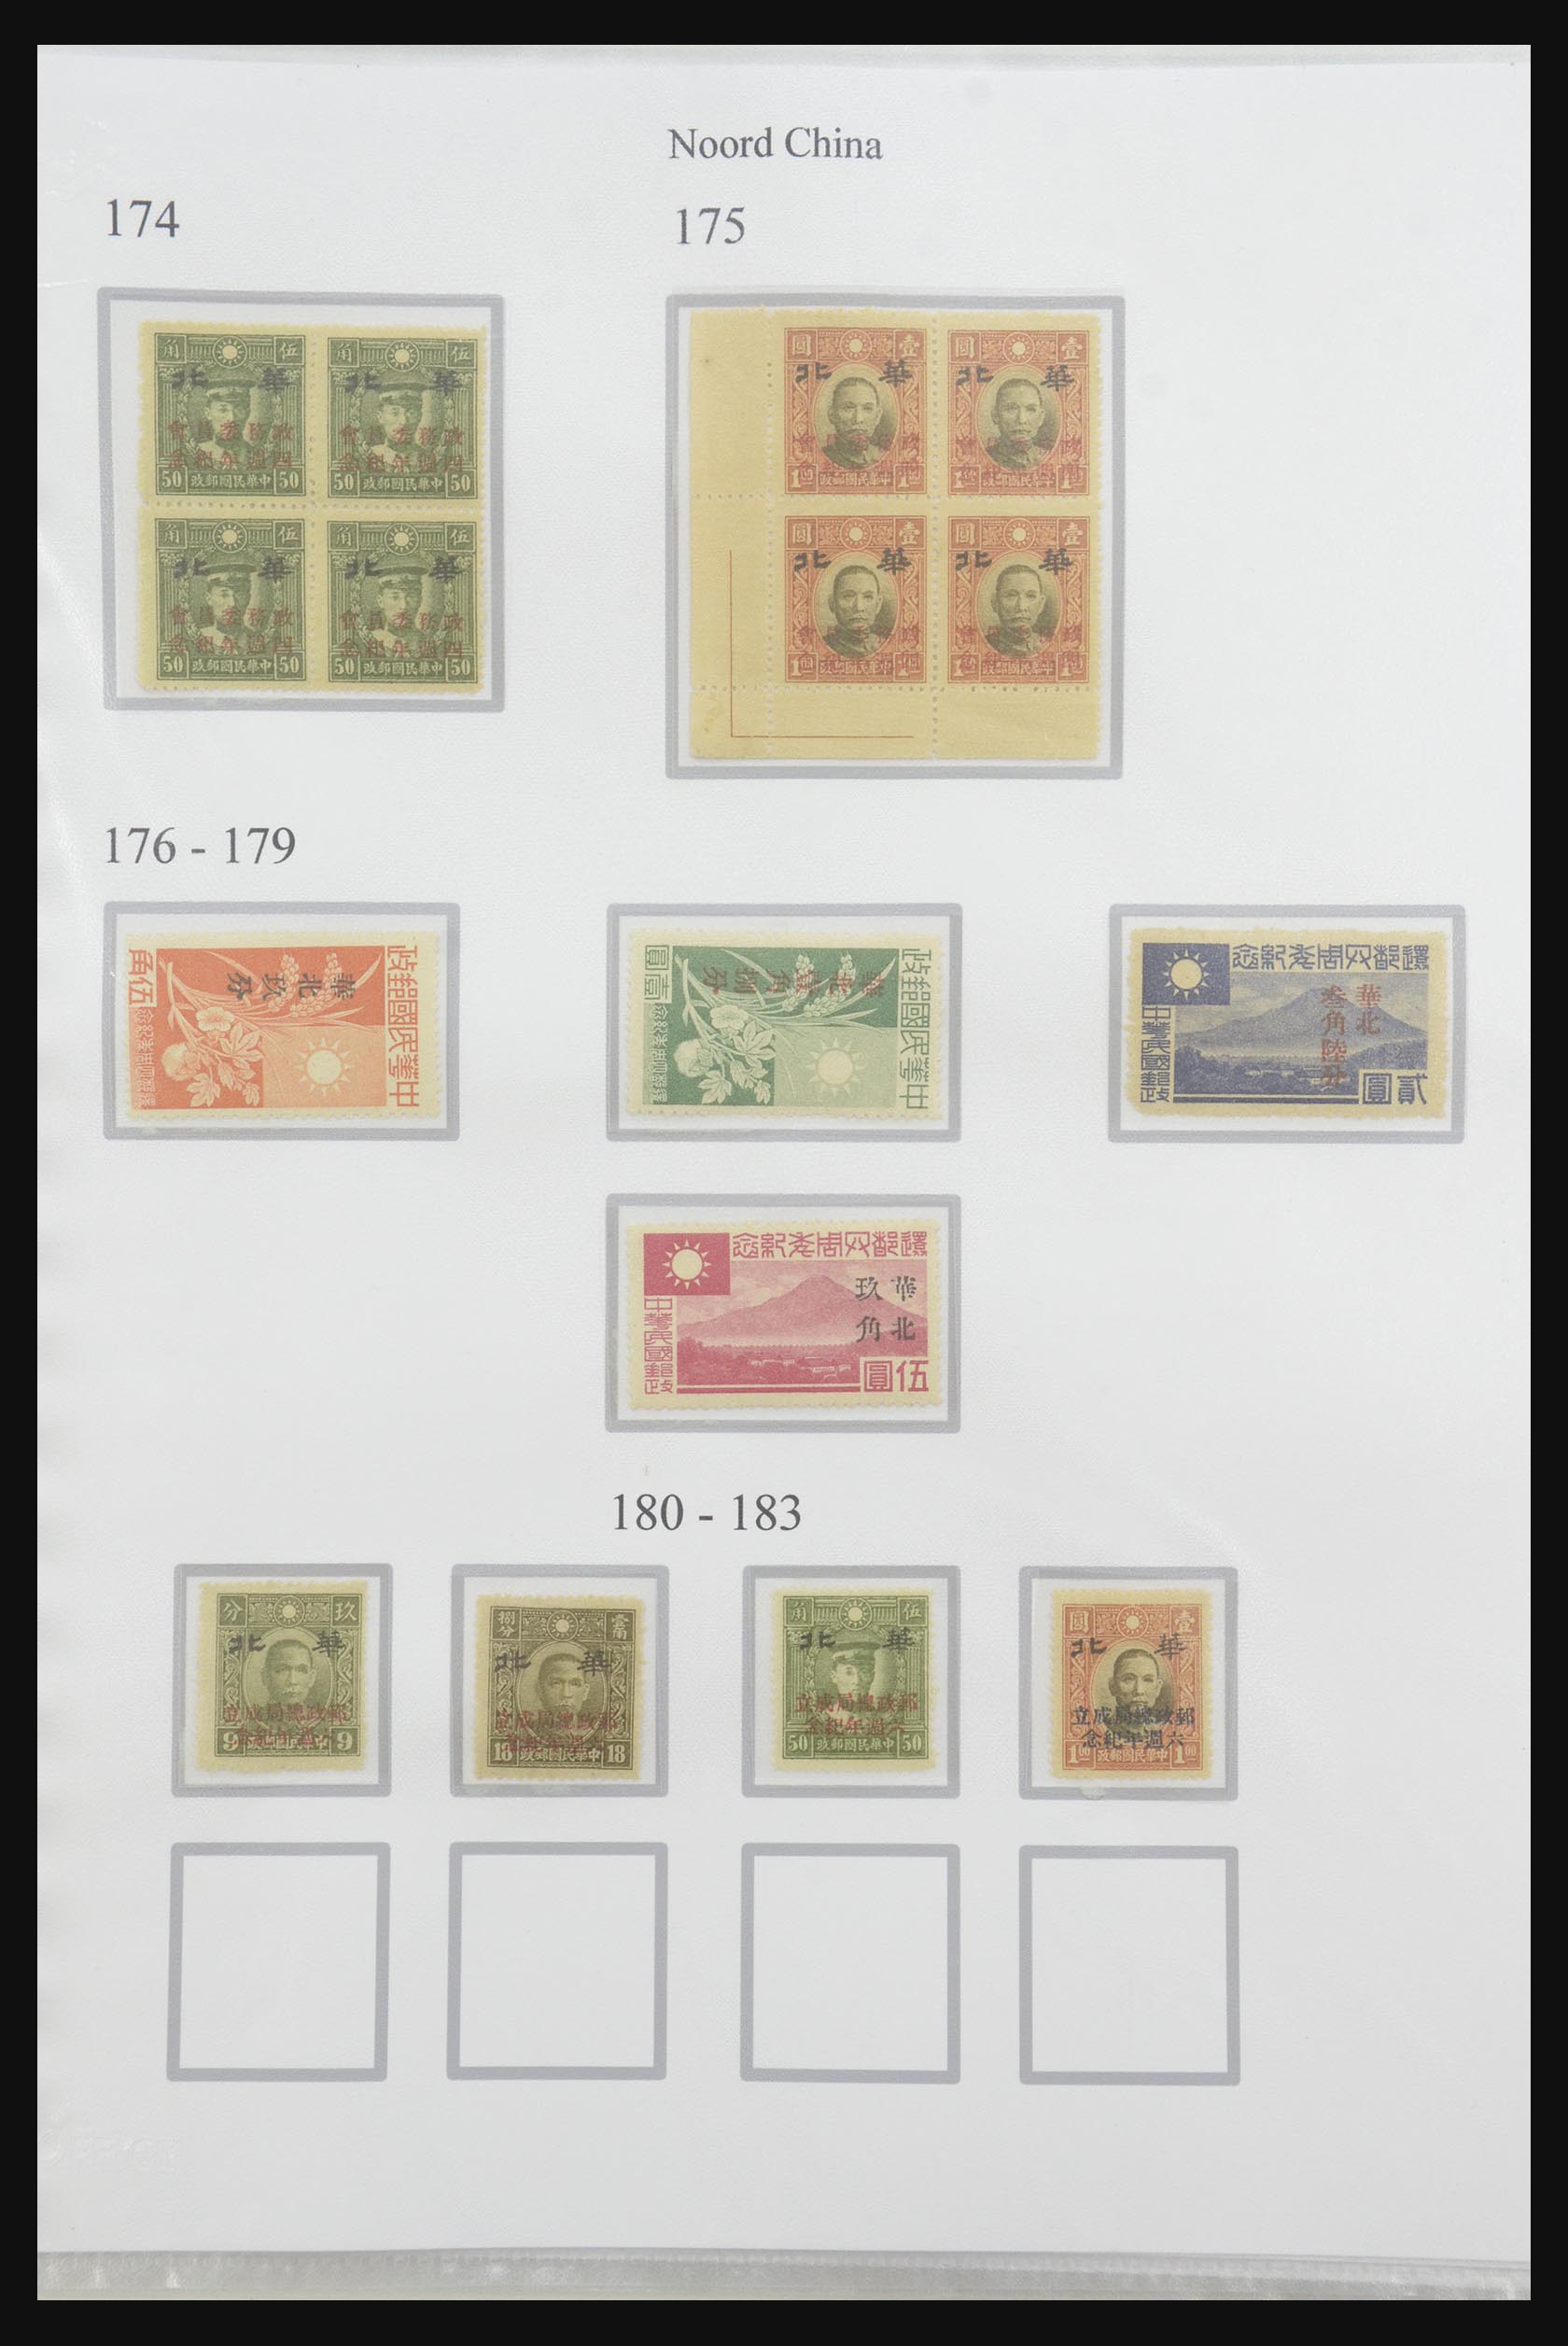 31756 061 - 31756 Japanese occupation of China 1942-1945.